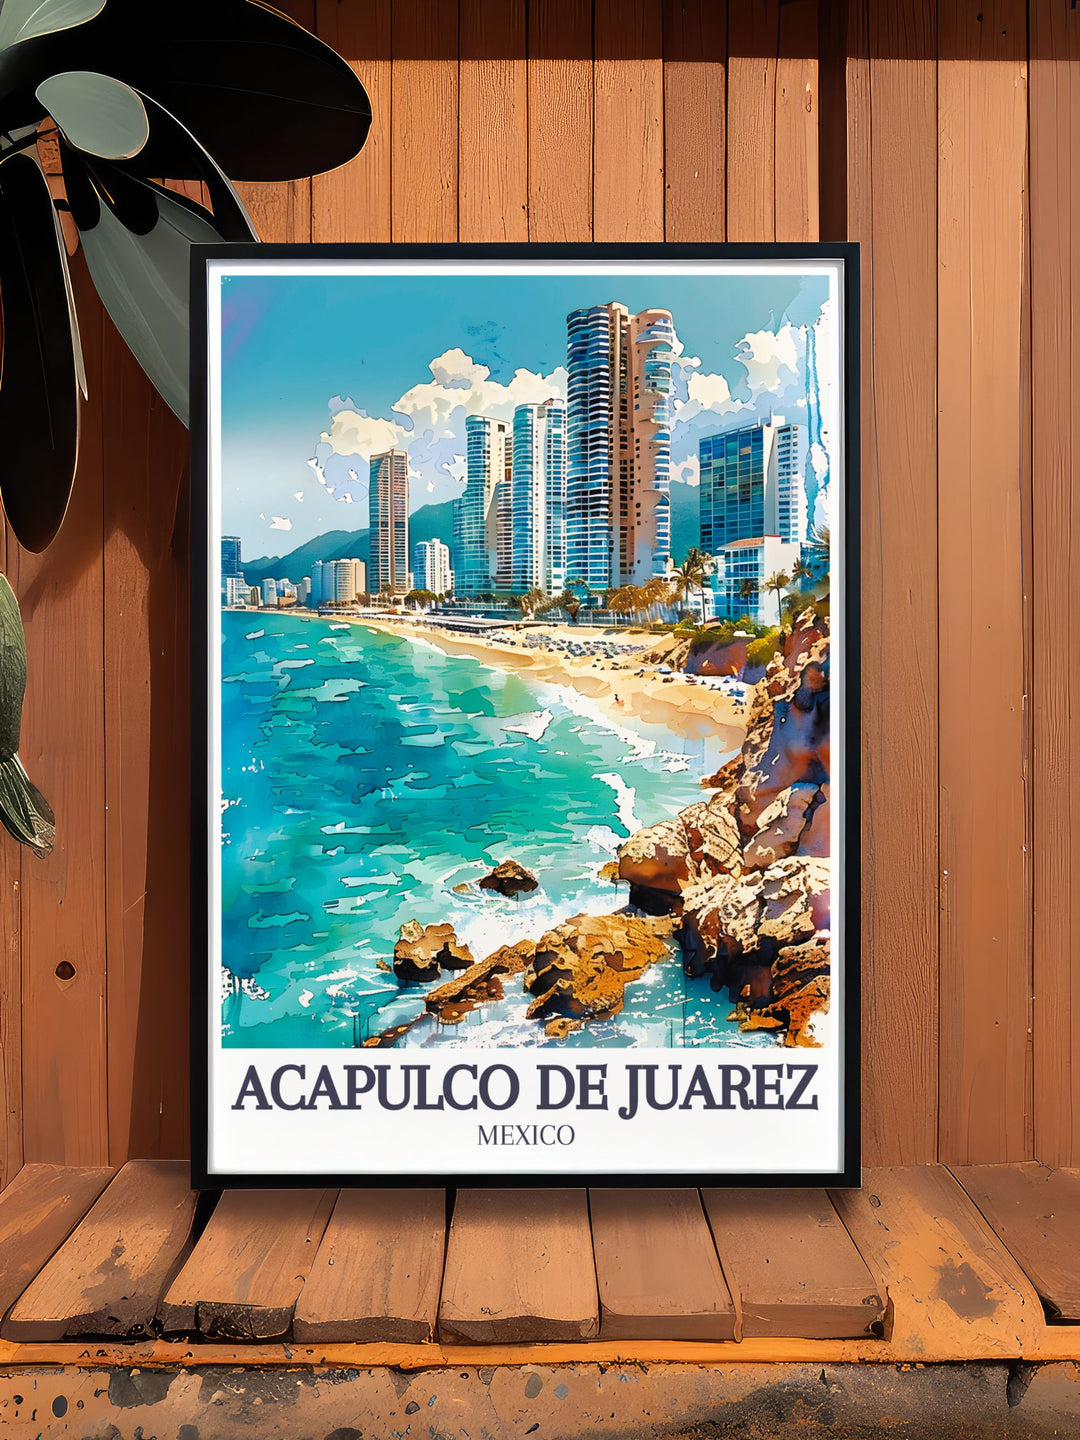 Acapulco Bays tranquil waters and the architectural beauty of Las Torres Gemelas are captured in this vibrant travel poster, showcasing Acapulco de Juárez.